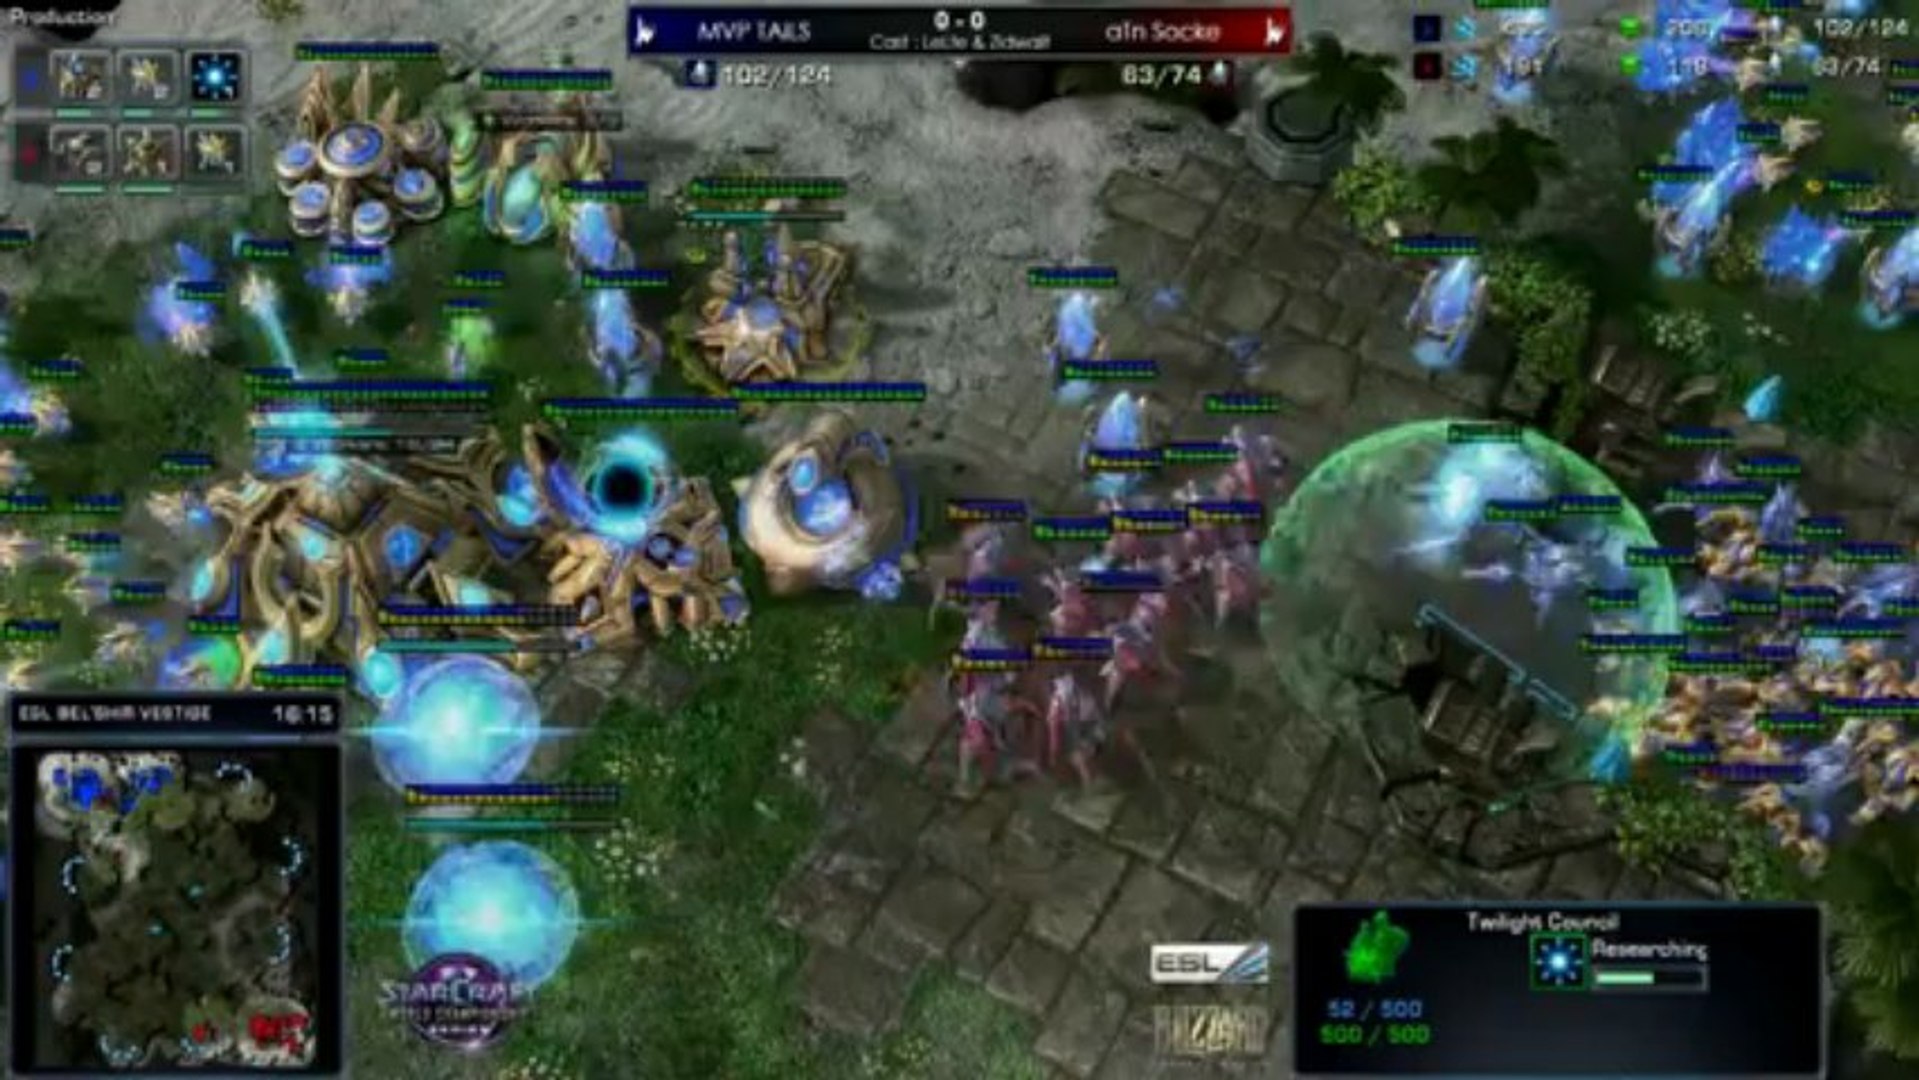 Socke vs TAiLS - Game 1 - WCS Starcraft 2 - Dailymotion